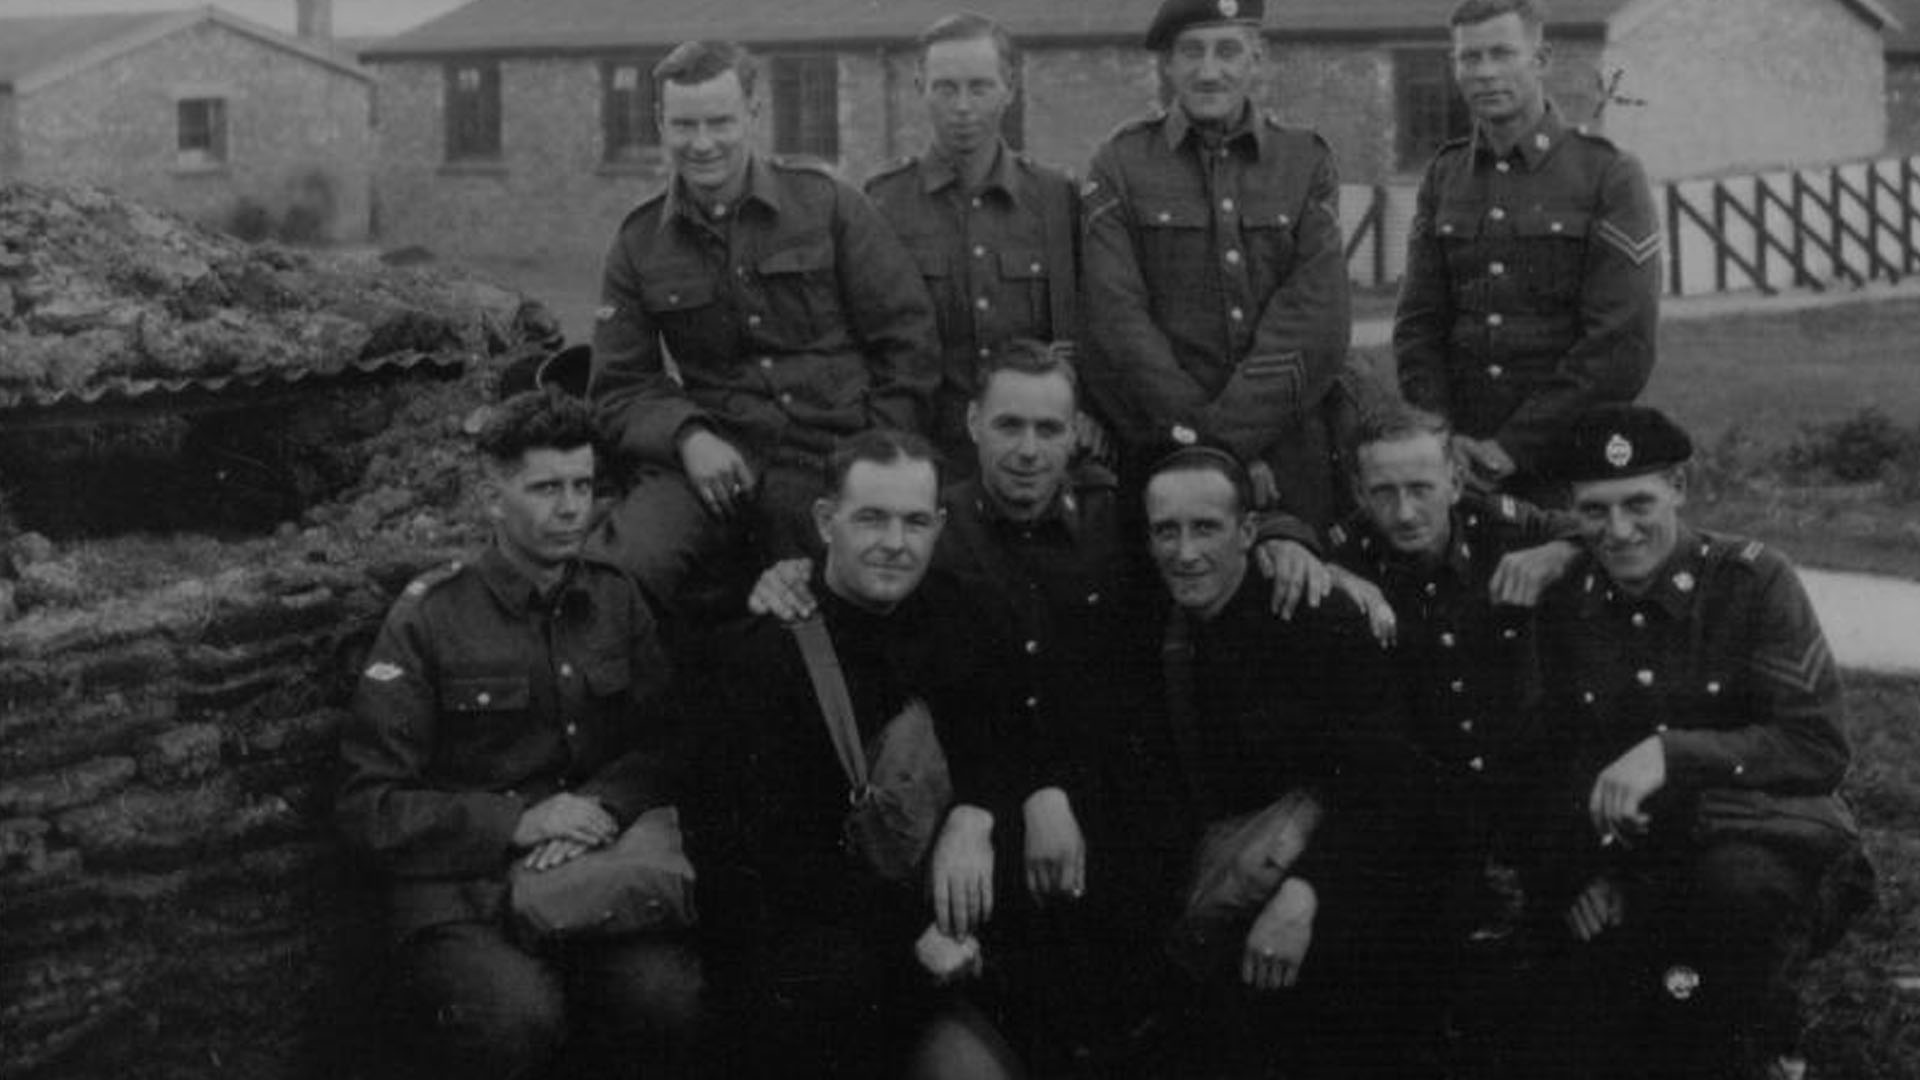 Corporal Alexander Liggett (back row, right-hand-hand side) poses with other members of the Royal Tank Regiment at an unknown location in the United Kingdom.